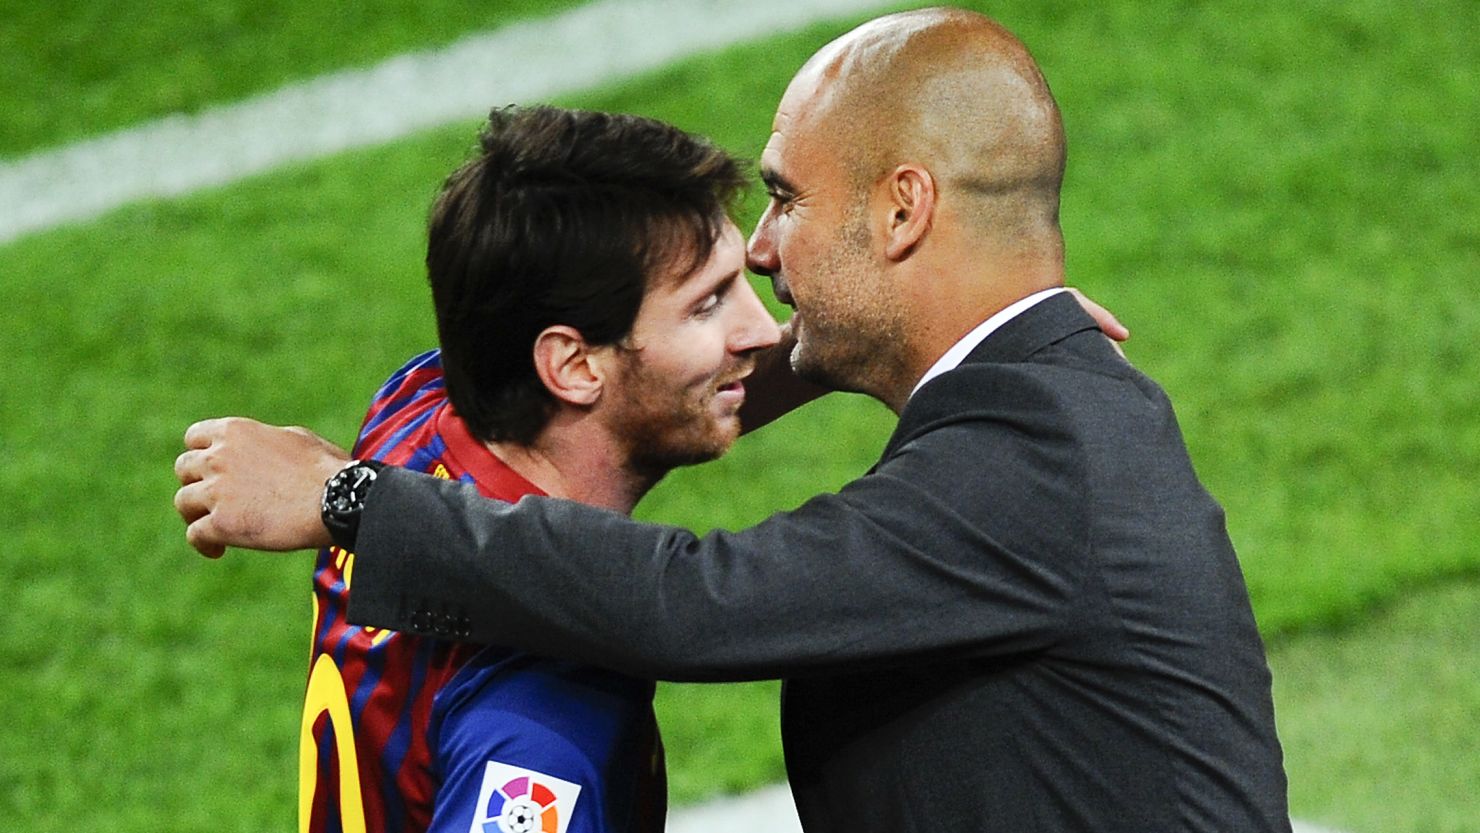 Lionel Messi hugs Barcelona coach Josep Guardiola after scoring his third goal in the derby against Espanyol.